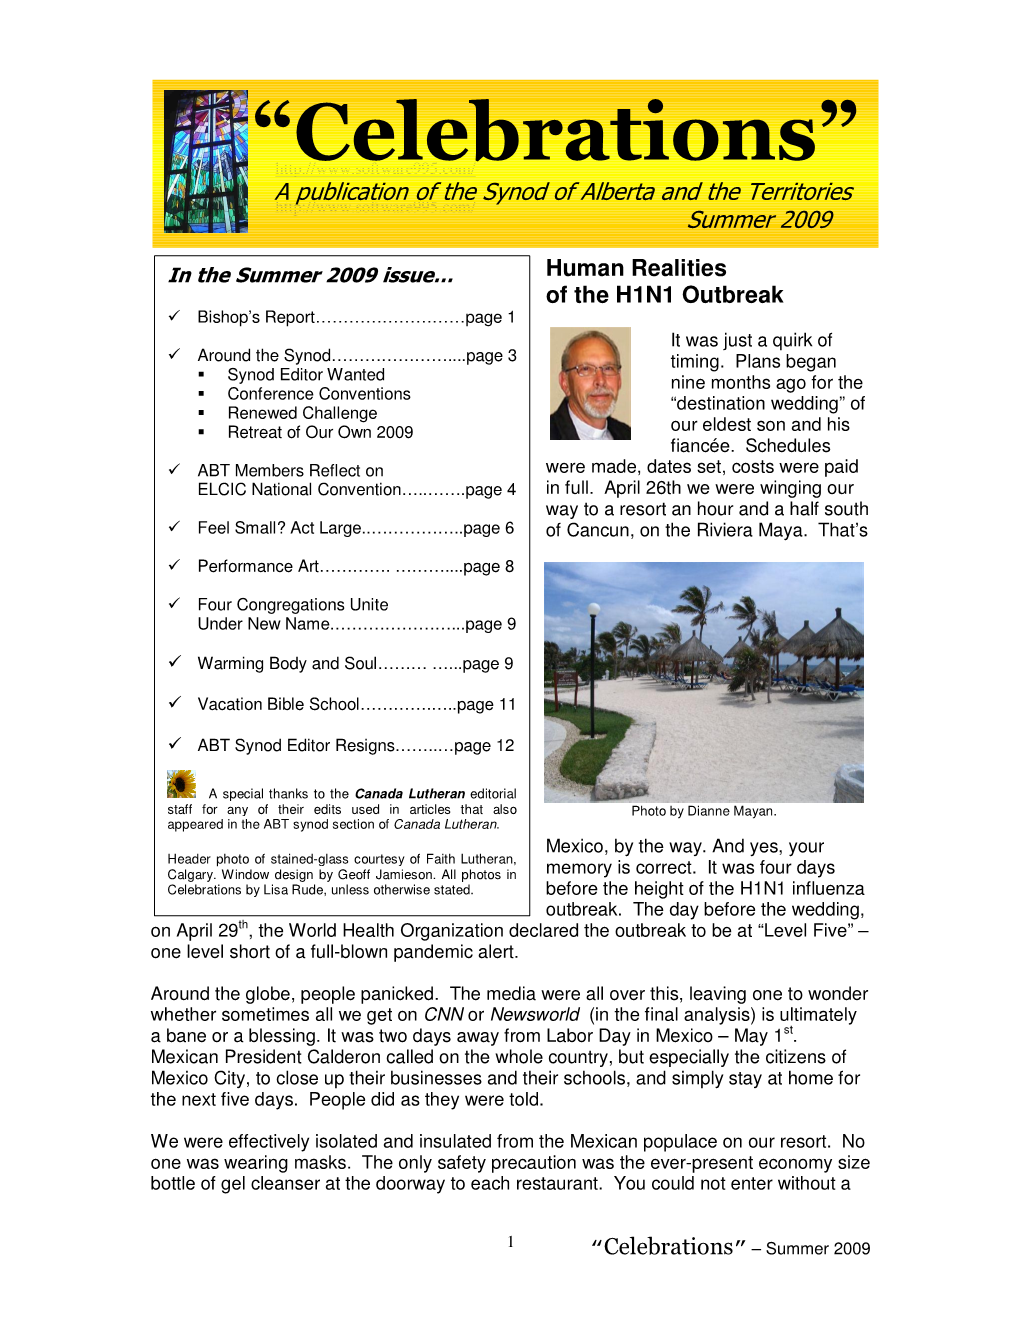 “Celebrations” a Publication of the Synod of Alberta and the Territories Summer 2009